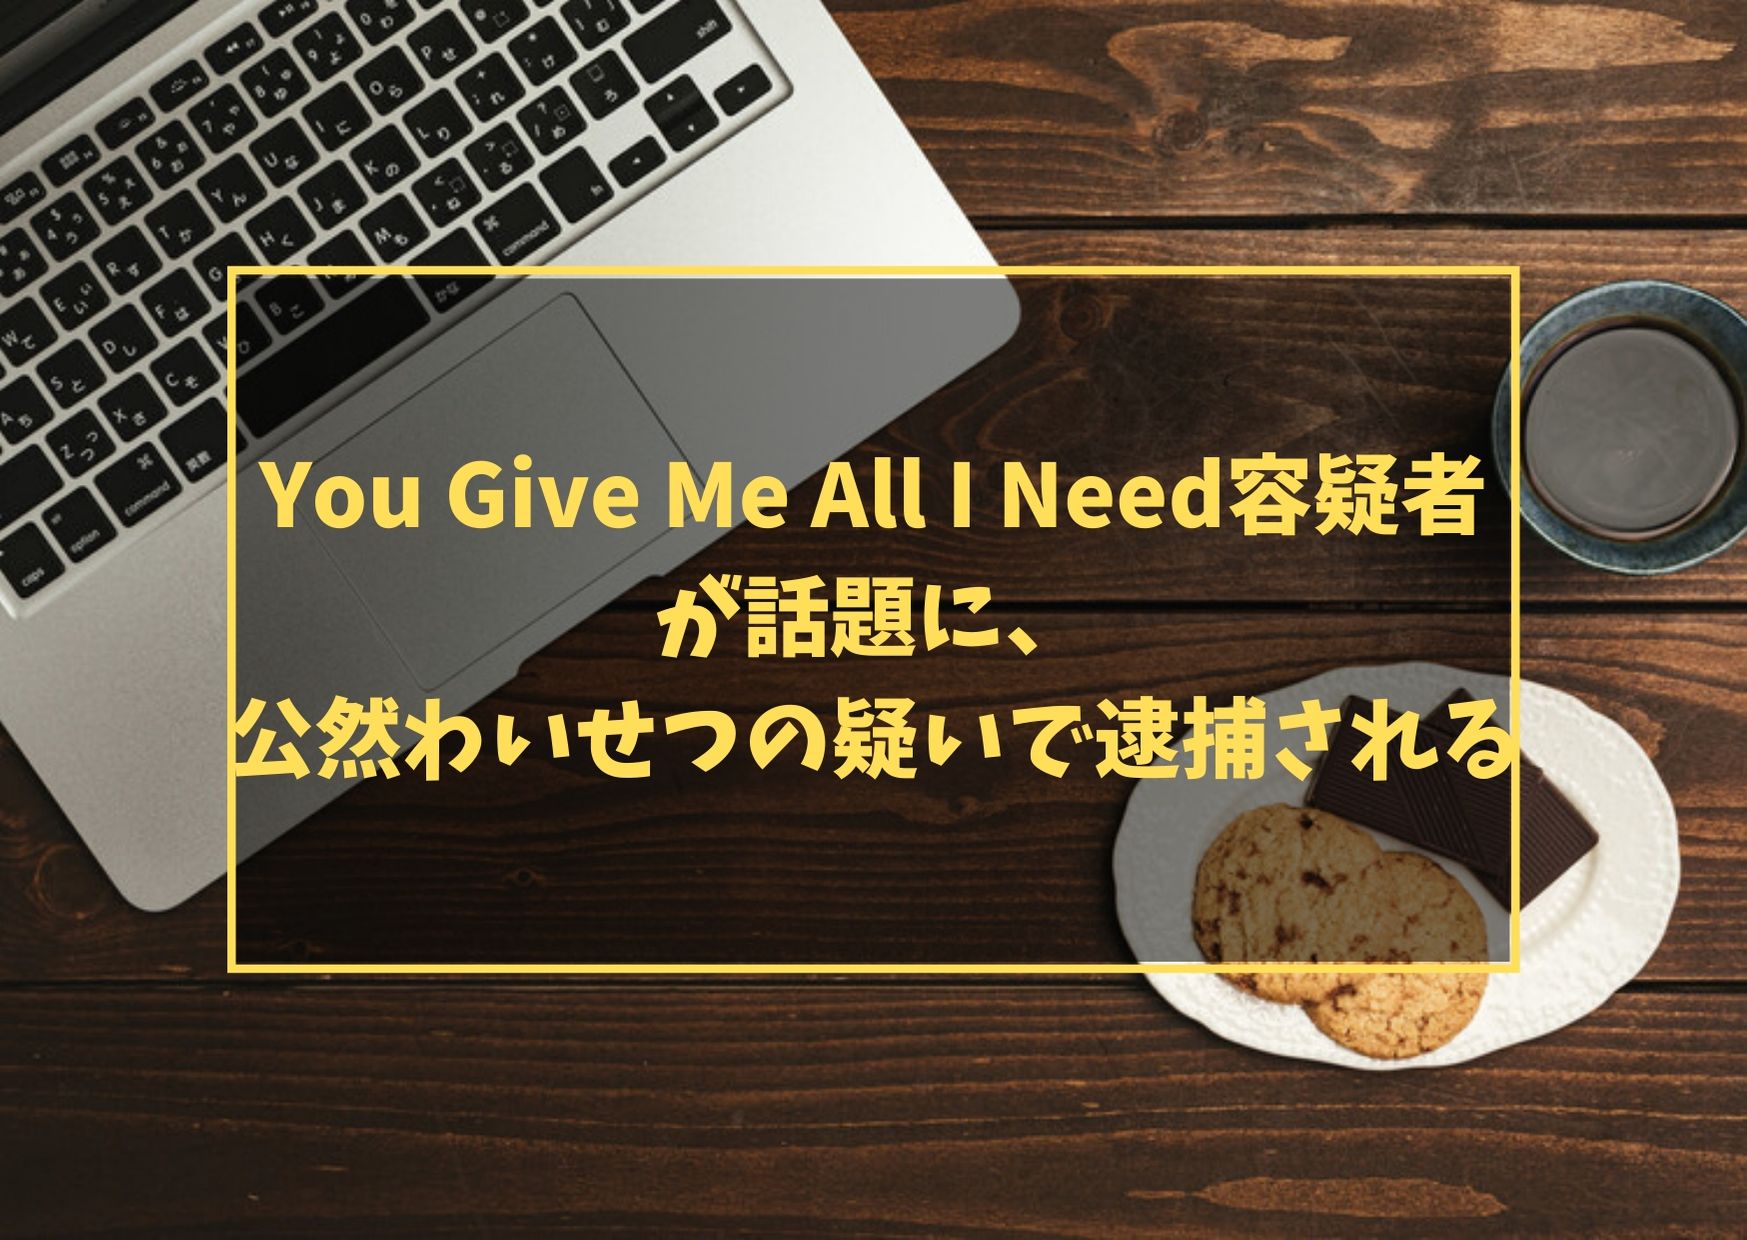 You Give Me All I Need容疑者が話題に、公然わいせつの疑いで逮捕される